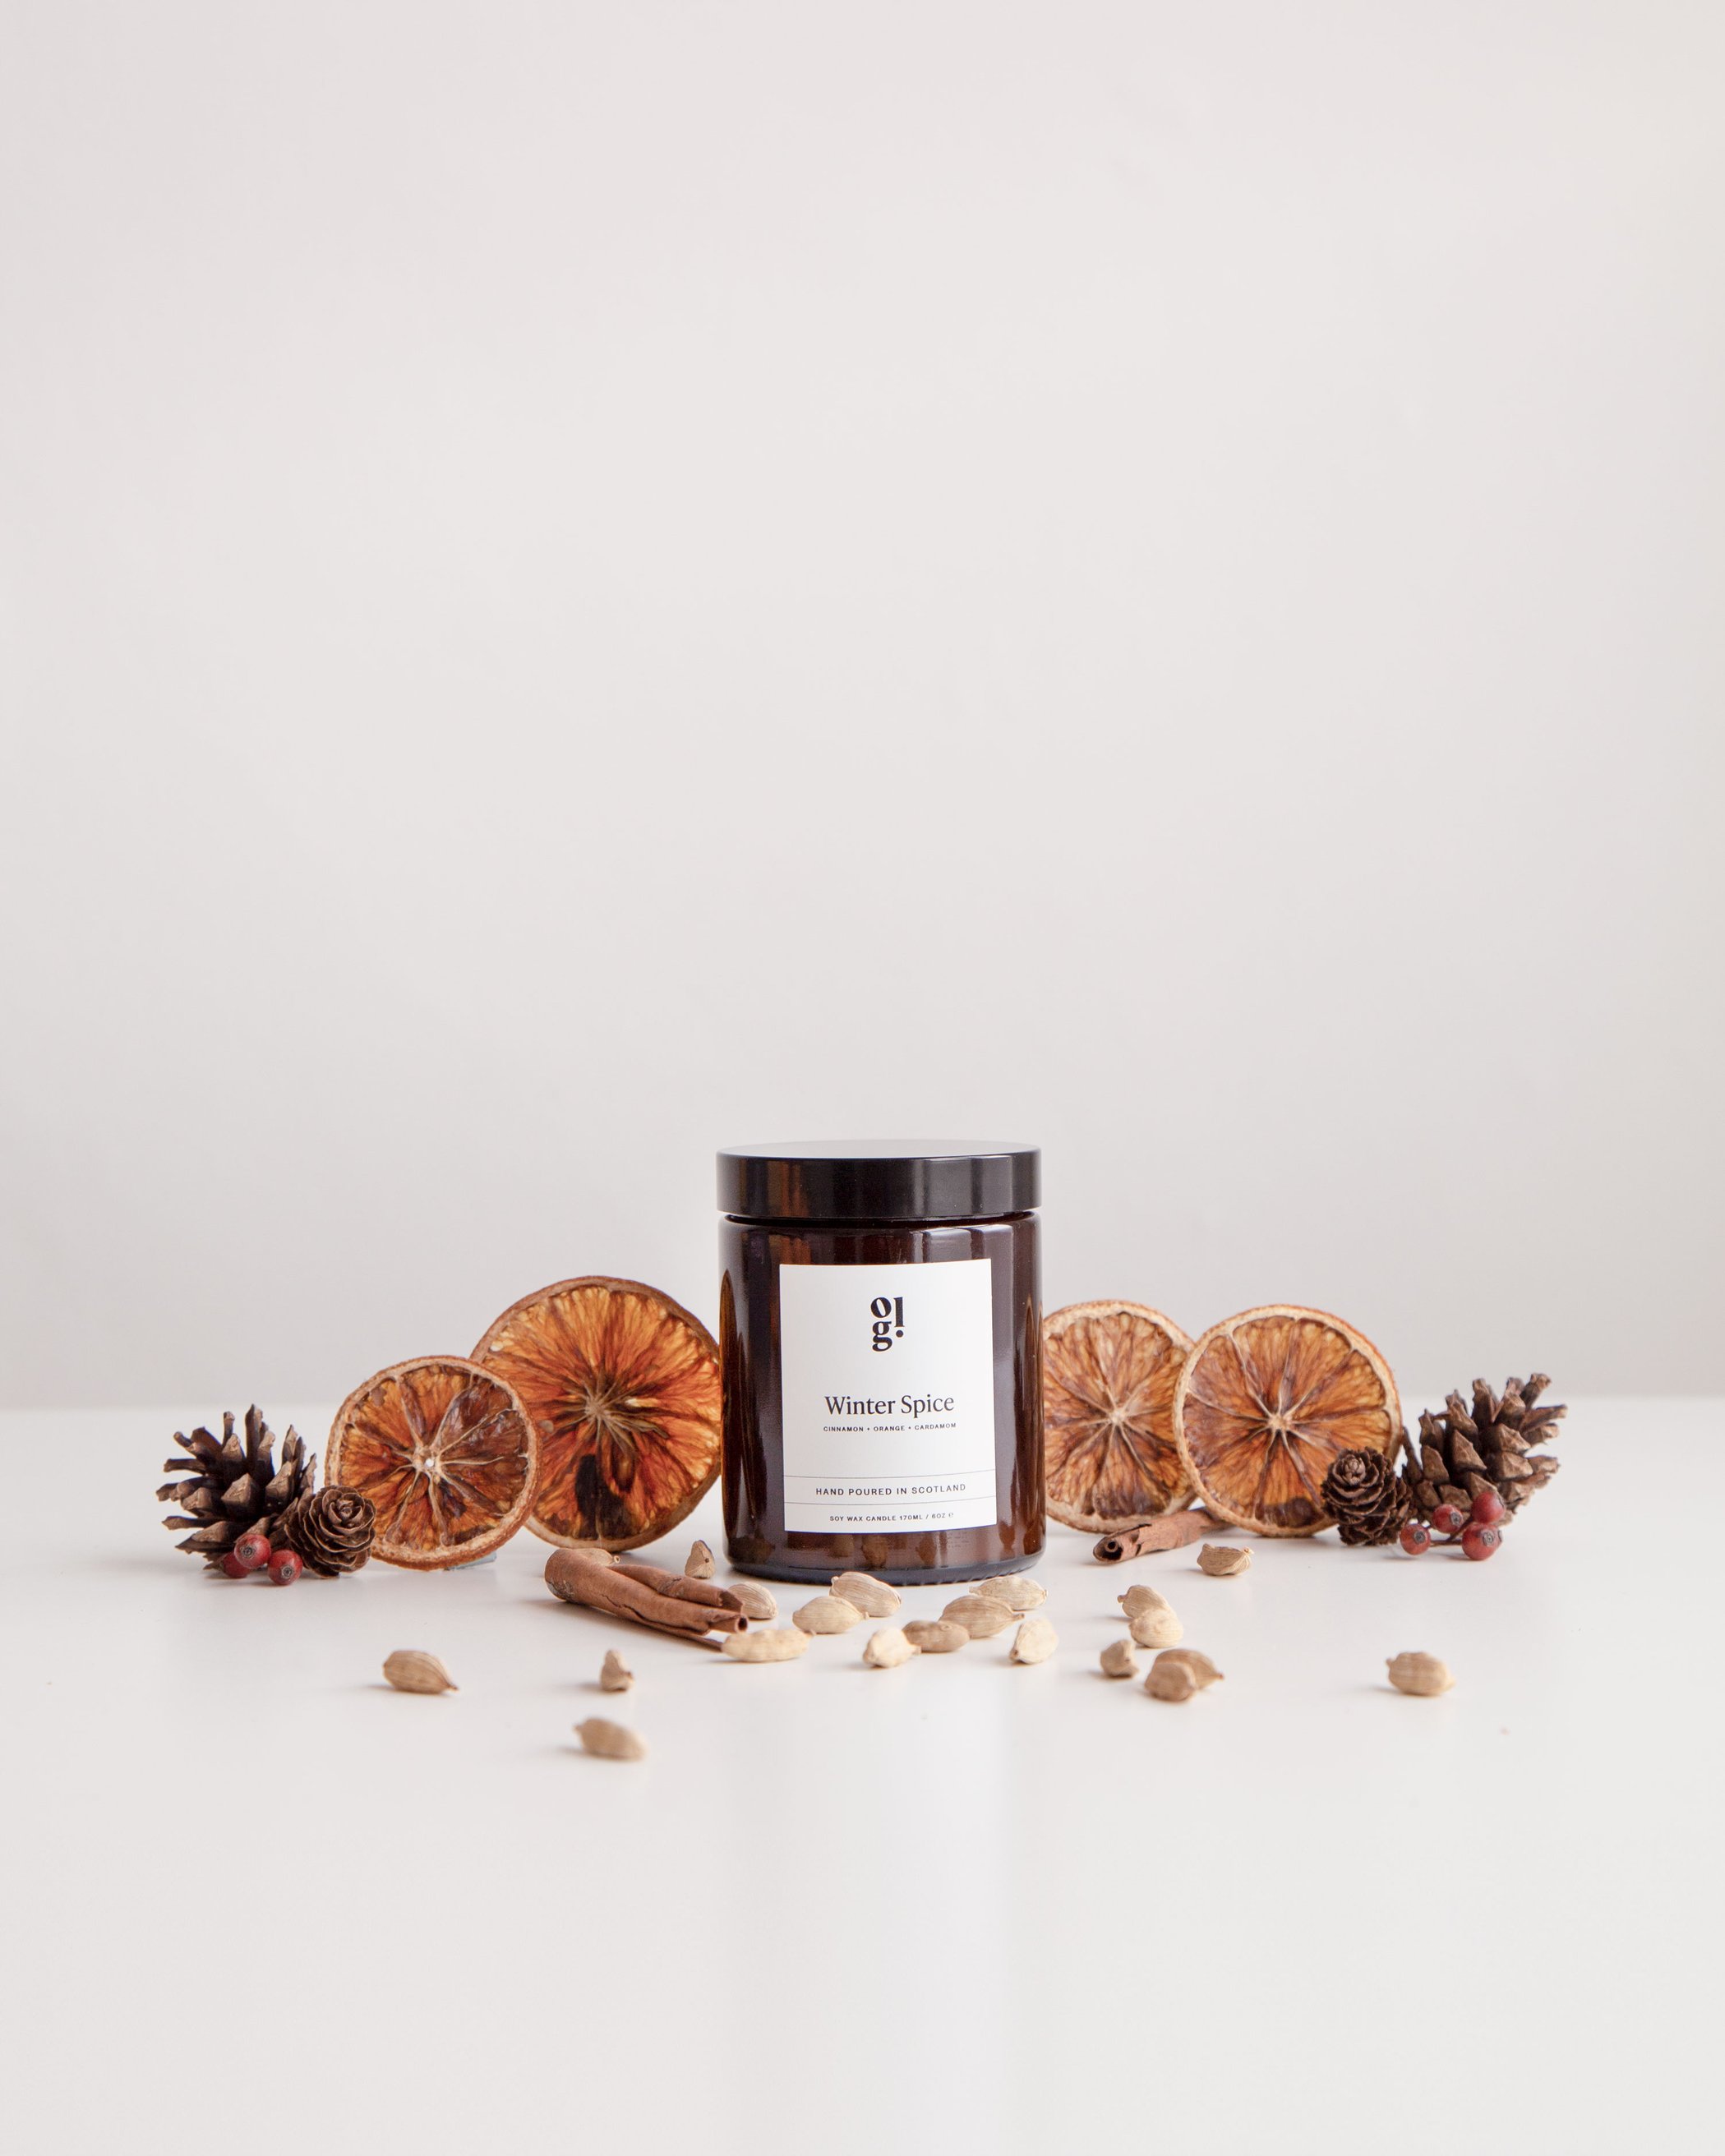 Our Lovely Goods Winter Spice Cinnamon Orange Zest Cardamom Candle